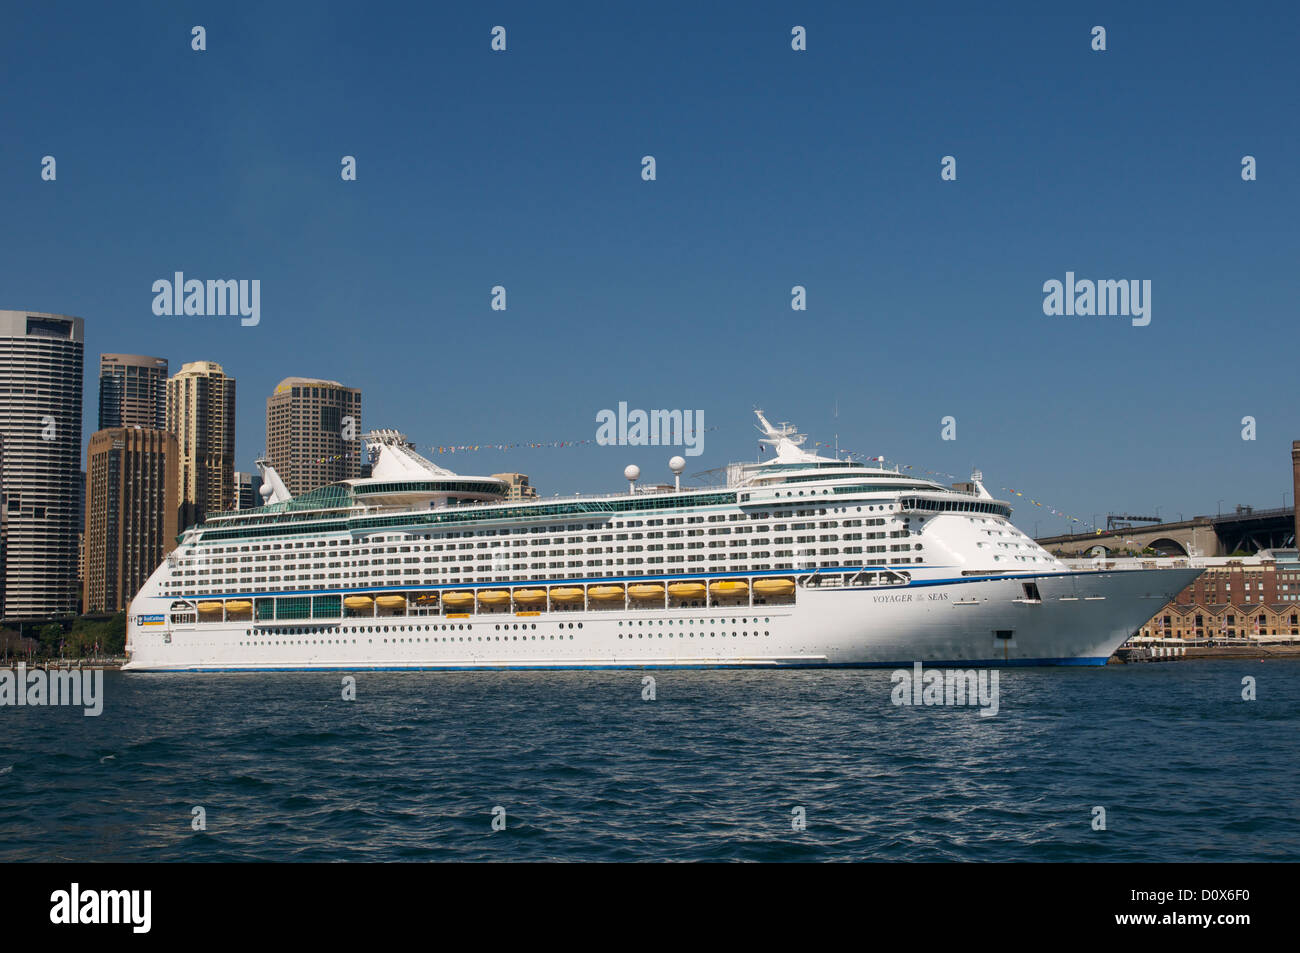 Cruise liner 'Voyager of the Seas' berthed in Circular Quay Sydney Australia Stock Photo